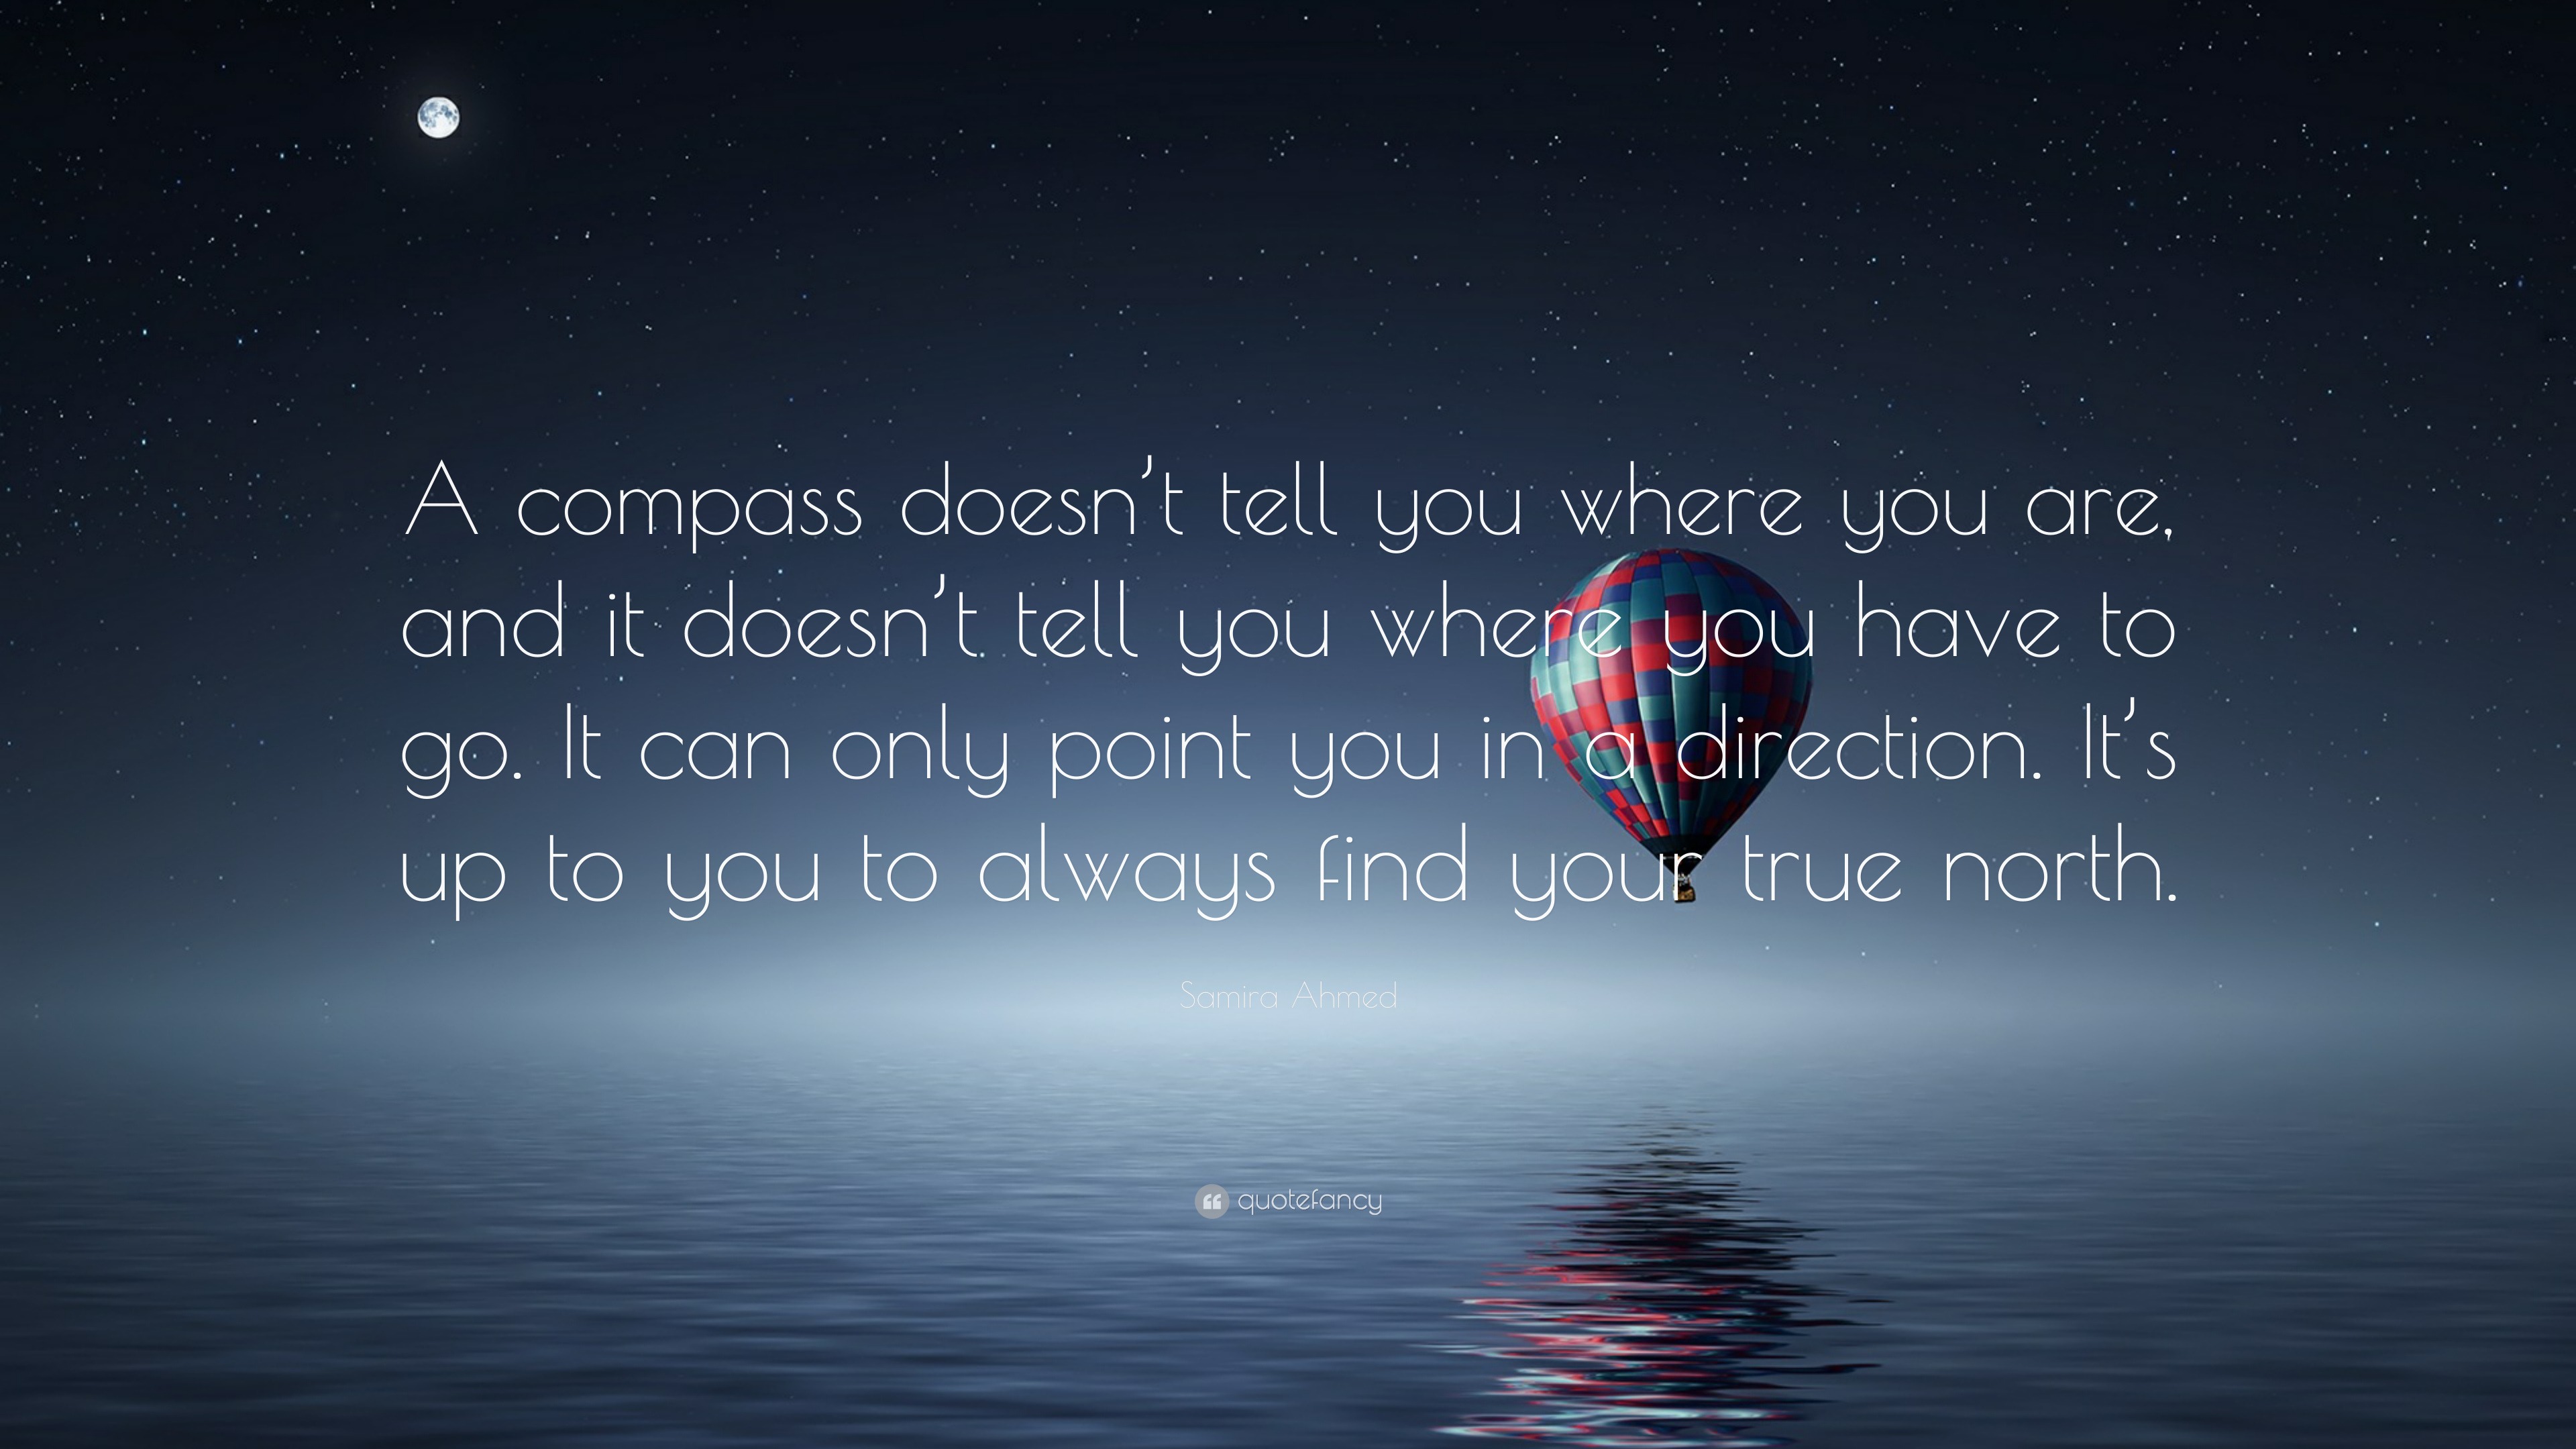 Samira Ahmed Quote: “A Compass Doesn't Tell You Where You Are, And It Doesn't Tell You Where You Have To Go. It Can Only Point You In A Direc...”